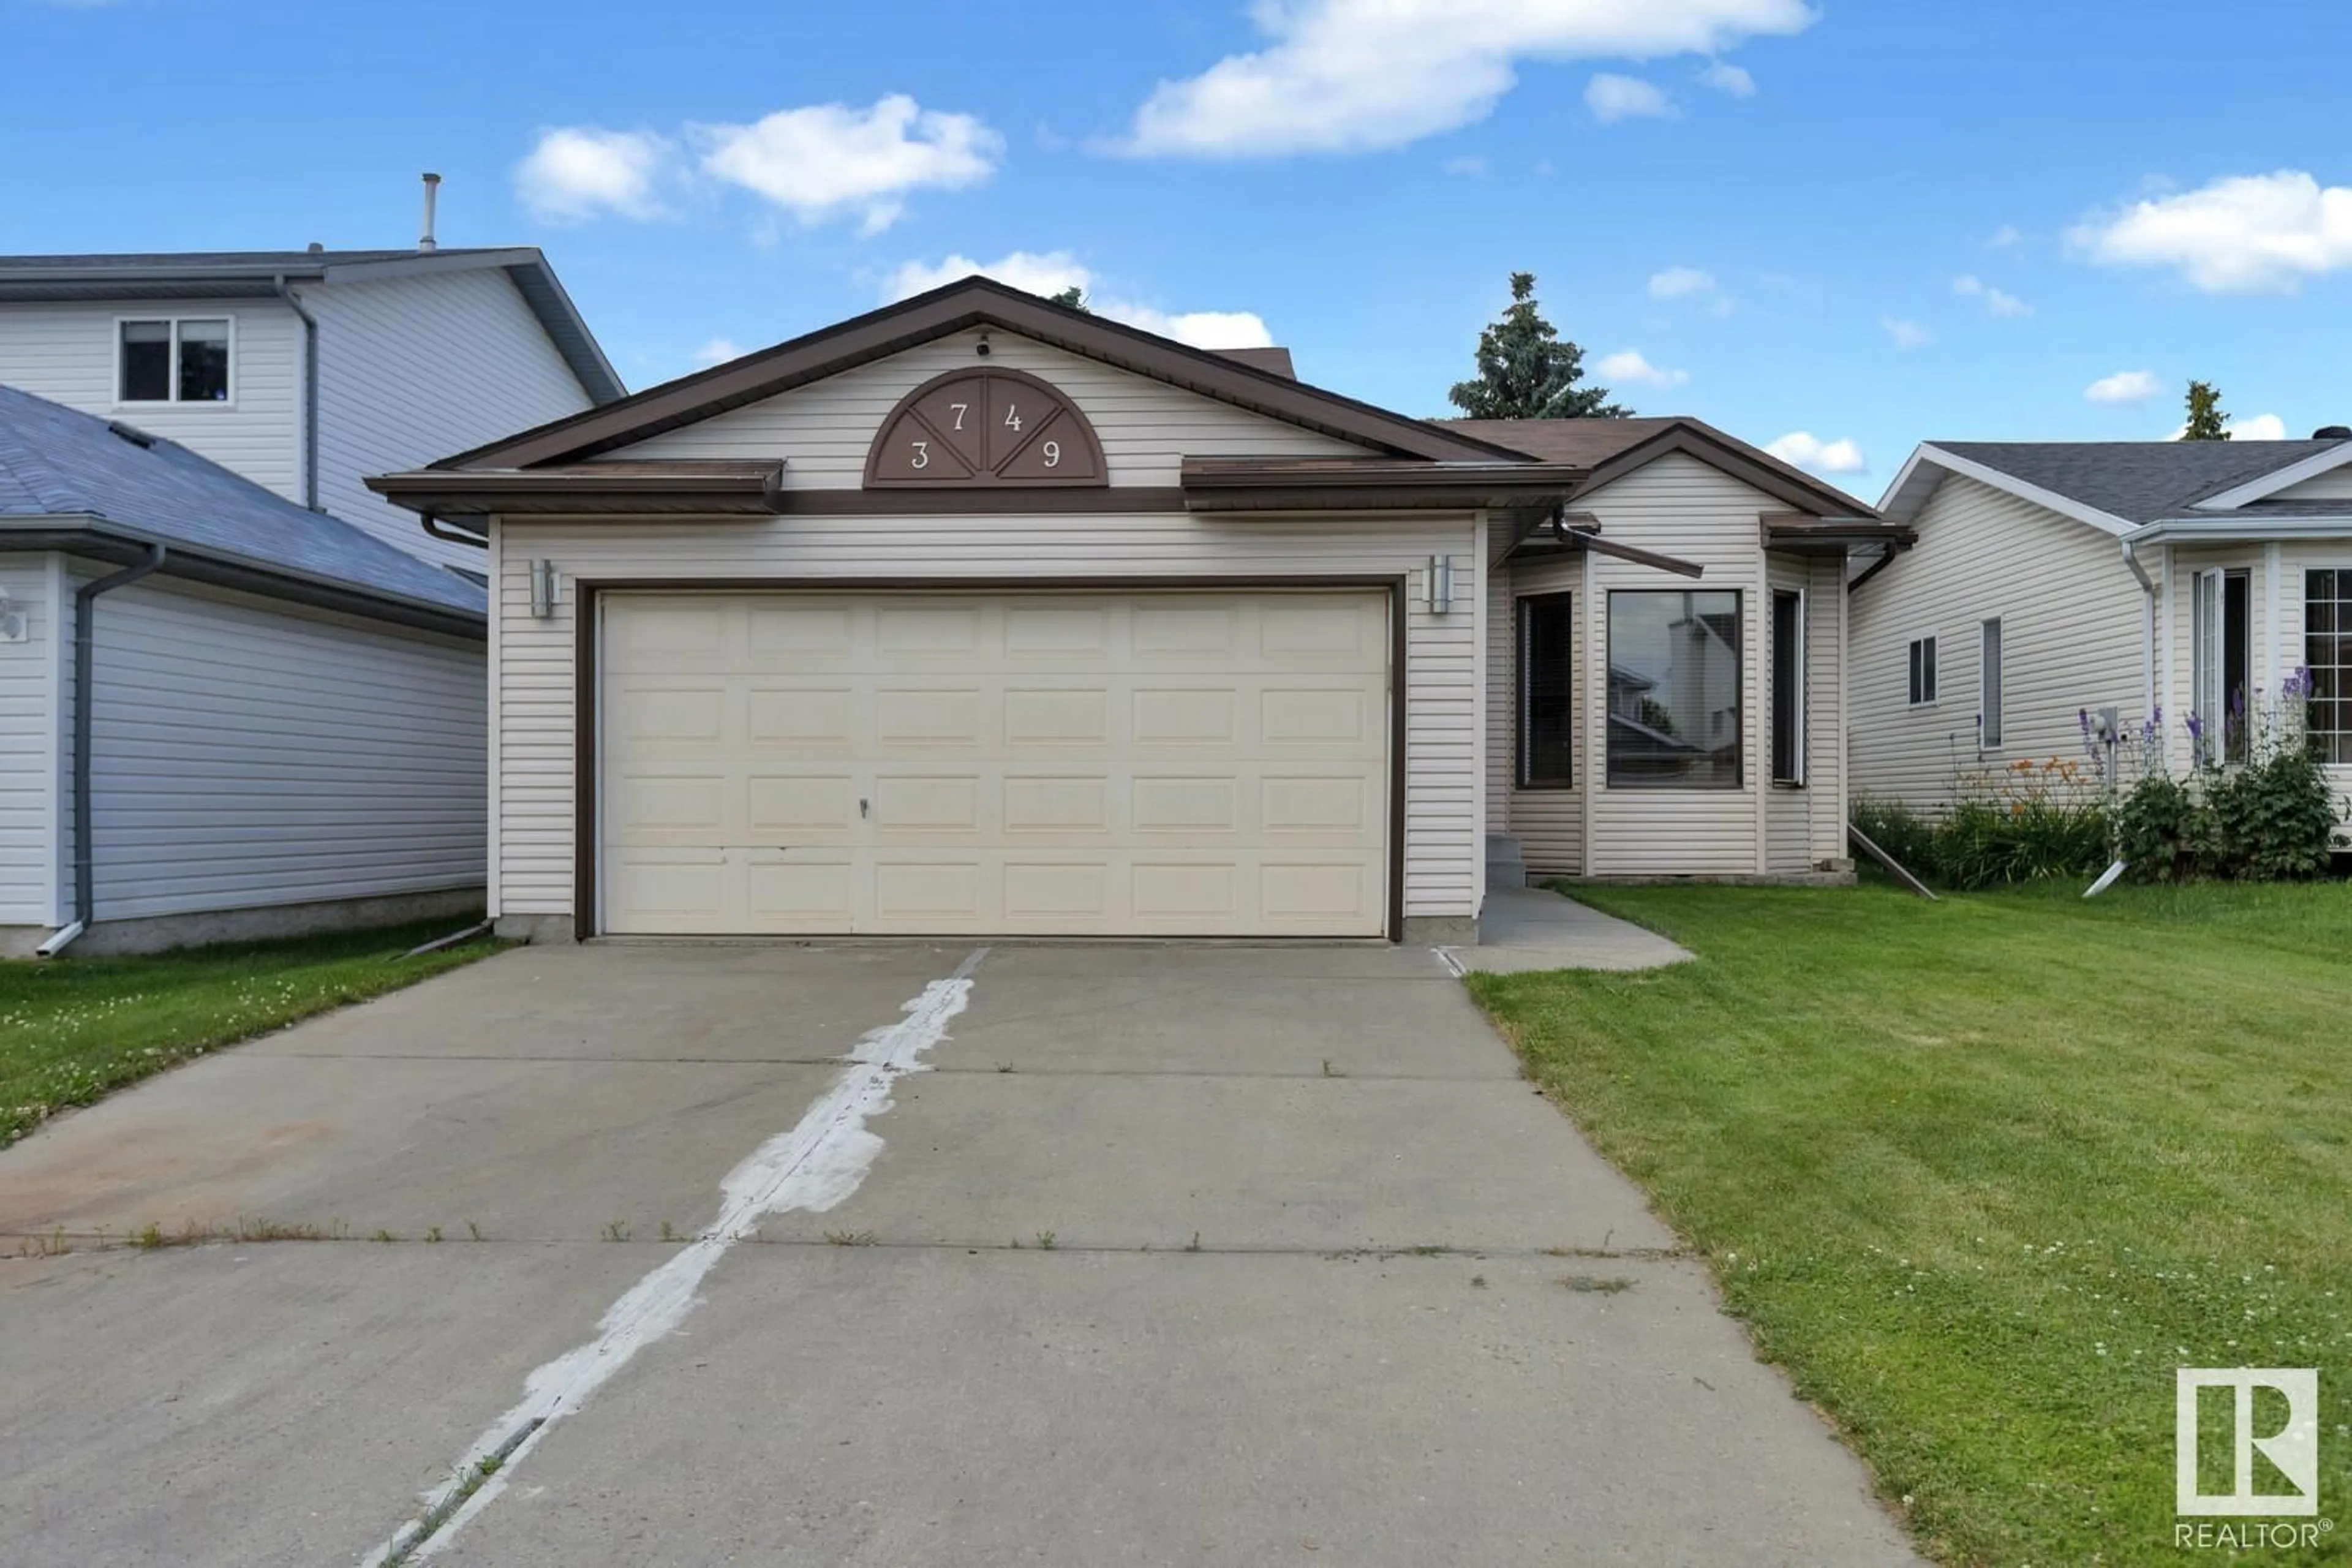 Frontside or backside of a home for 3749 131A AV NW NW, Edmonton Alberta T5A4Y7